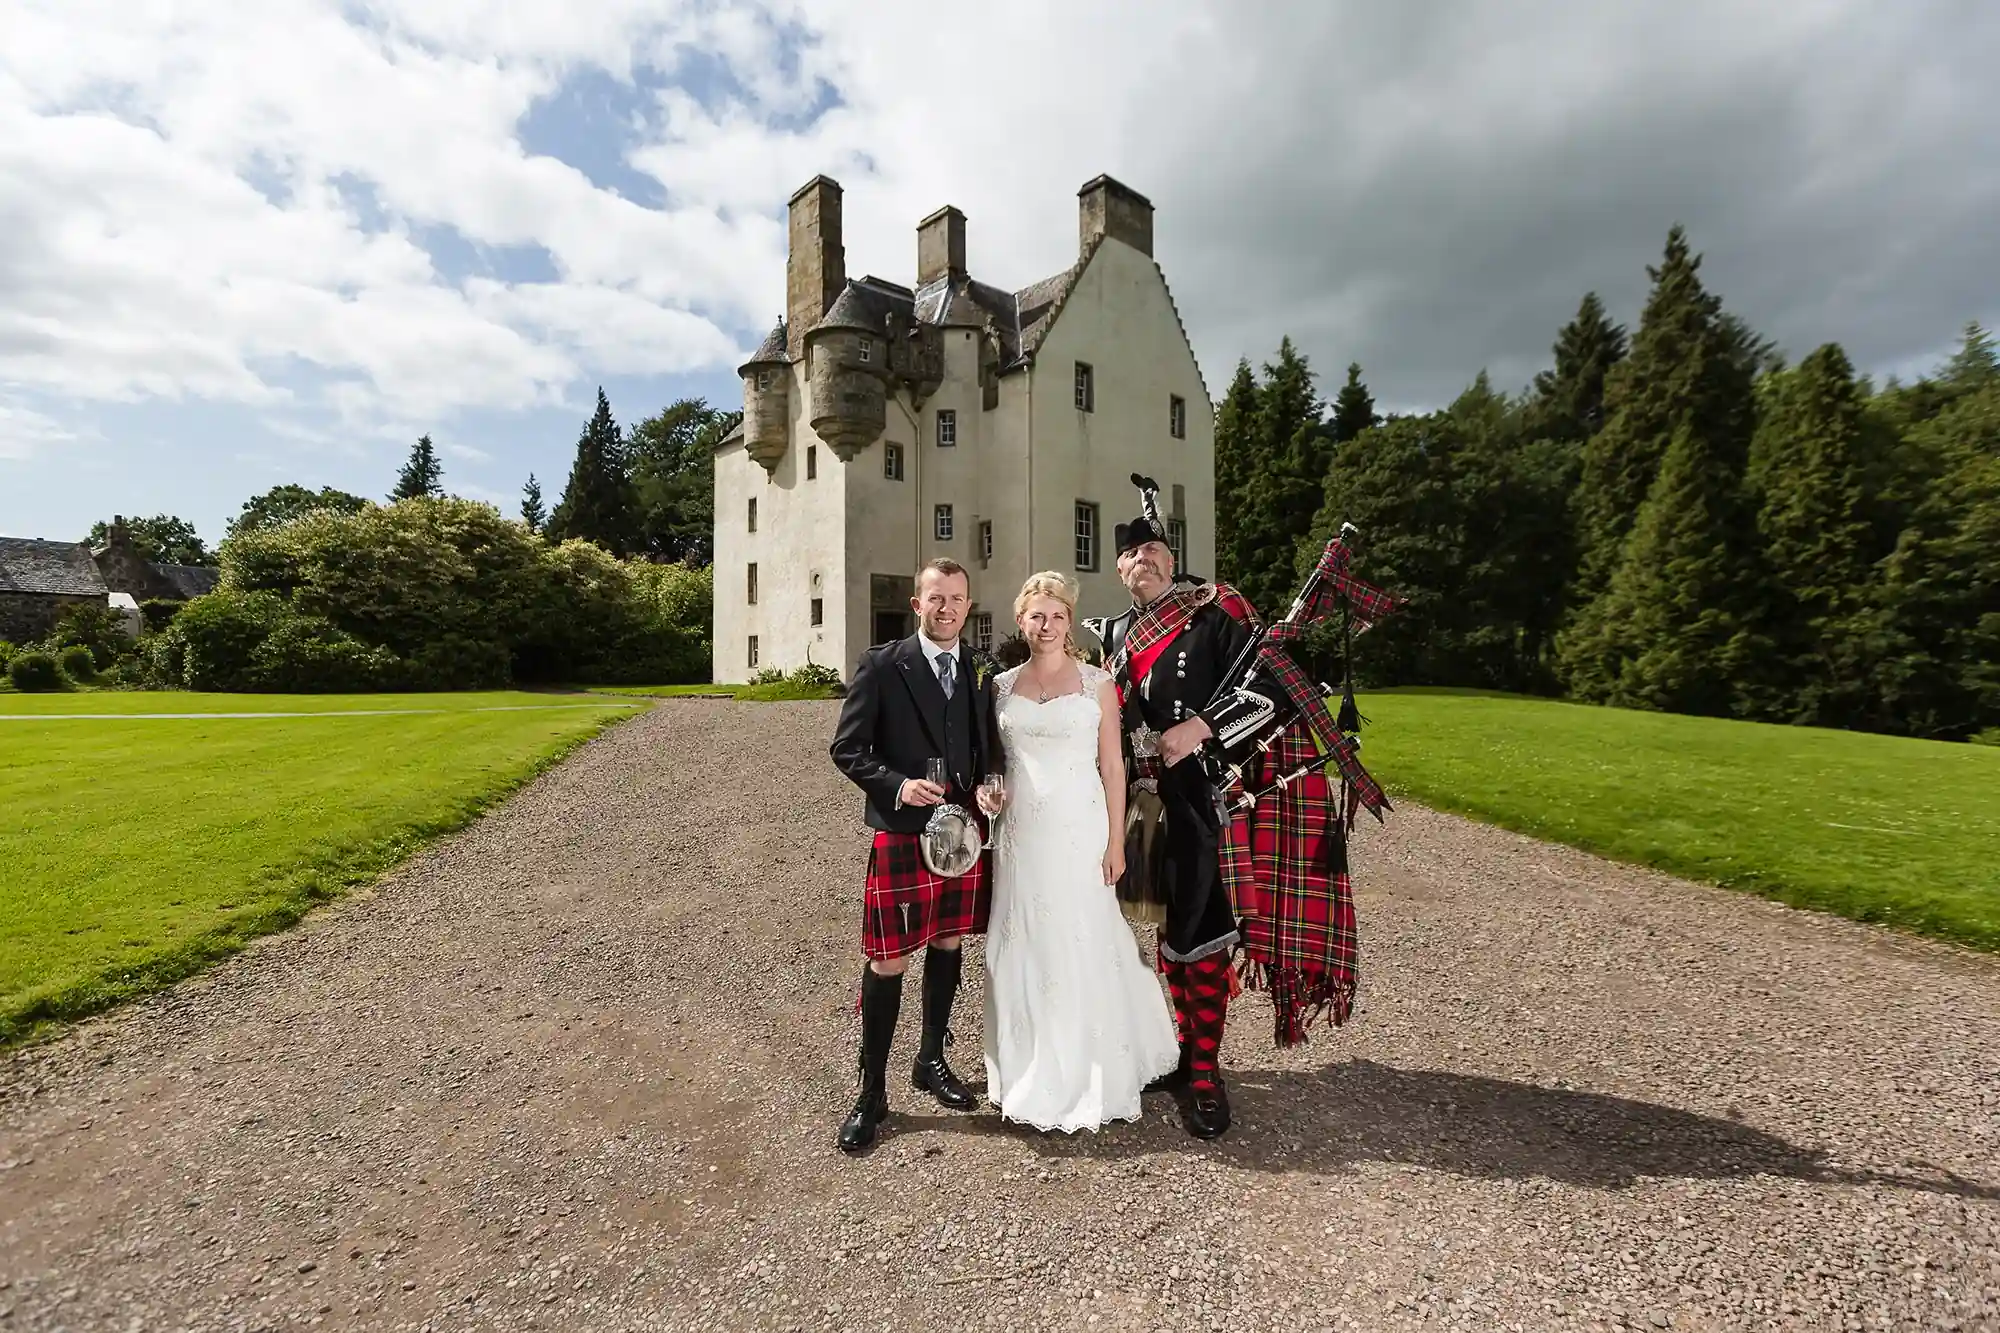 A bride and groom stand with a bagpiper in front of a historic castle on a sunny day, all dressed in traditional scottish attire.